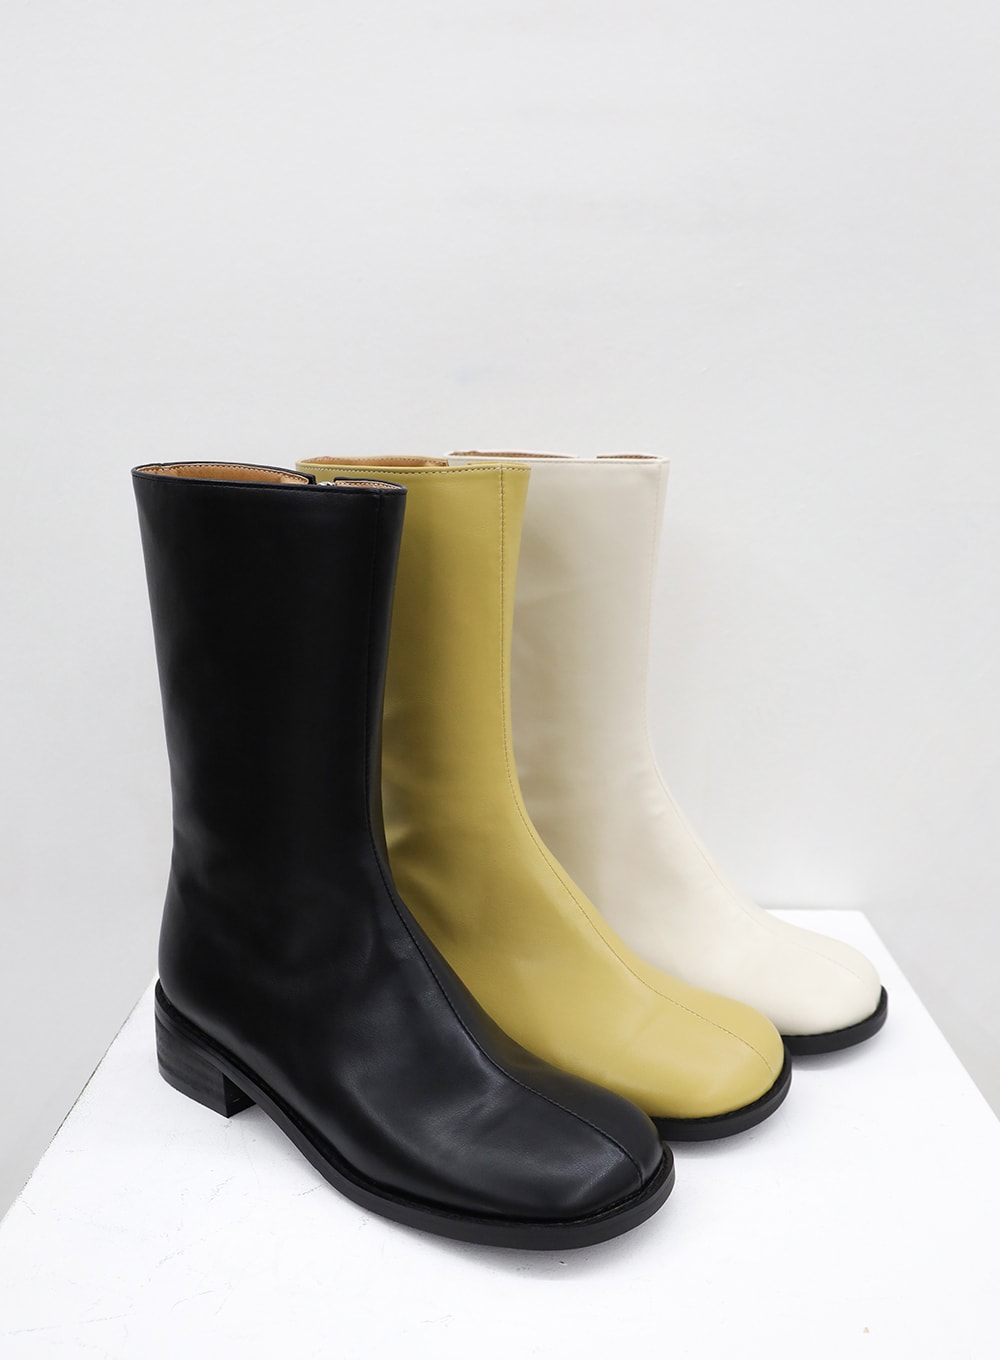 Basic Mid-Calf Round Boots OU12